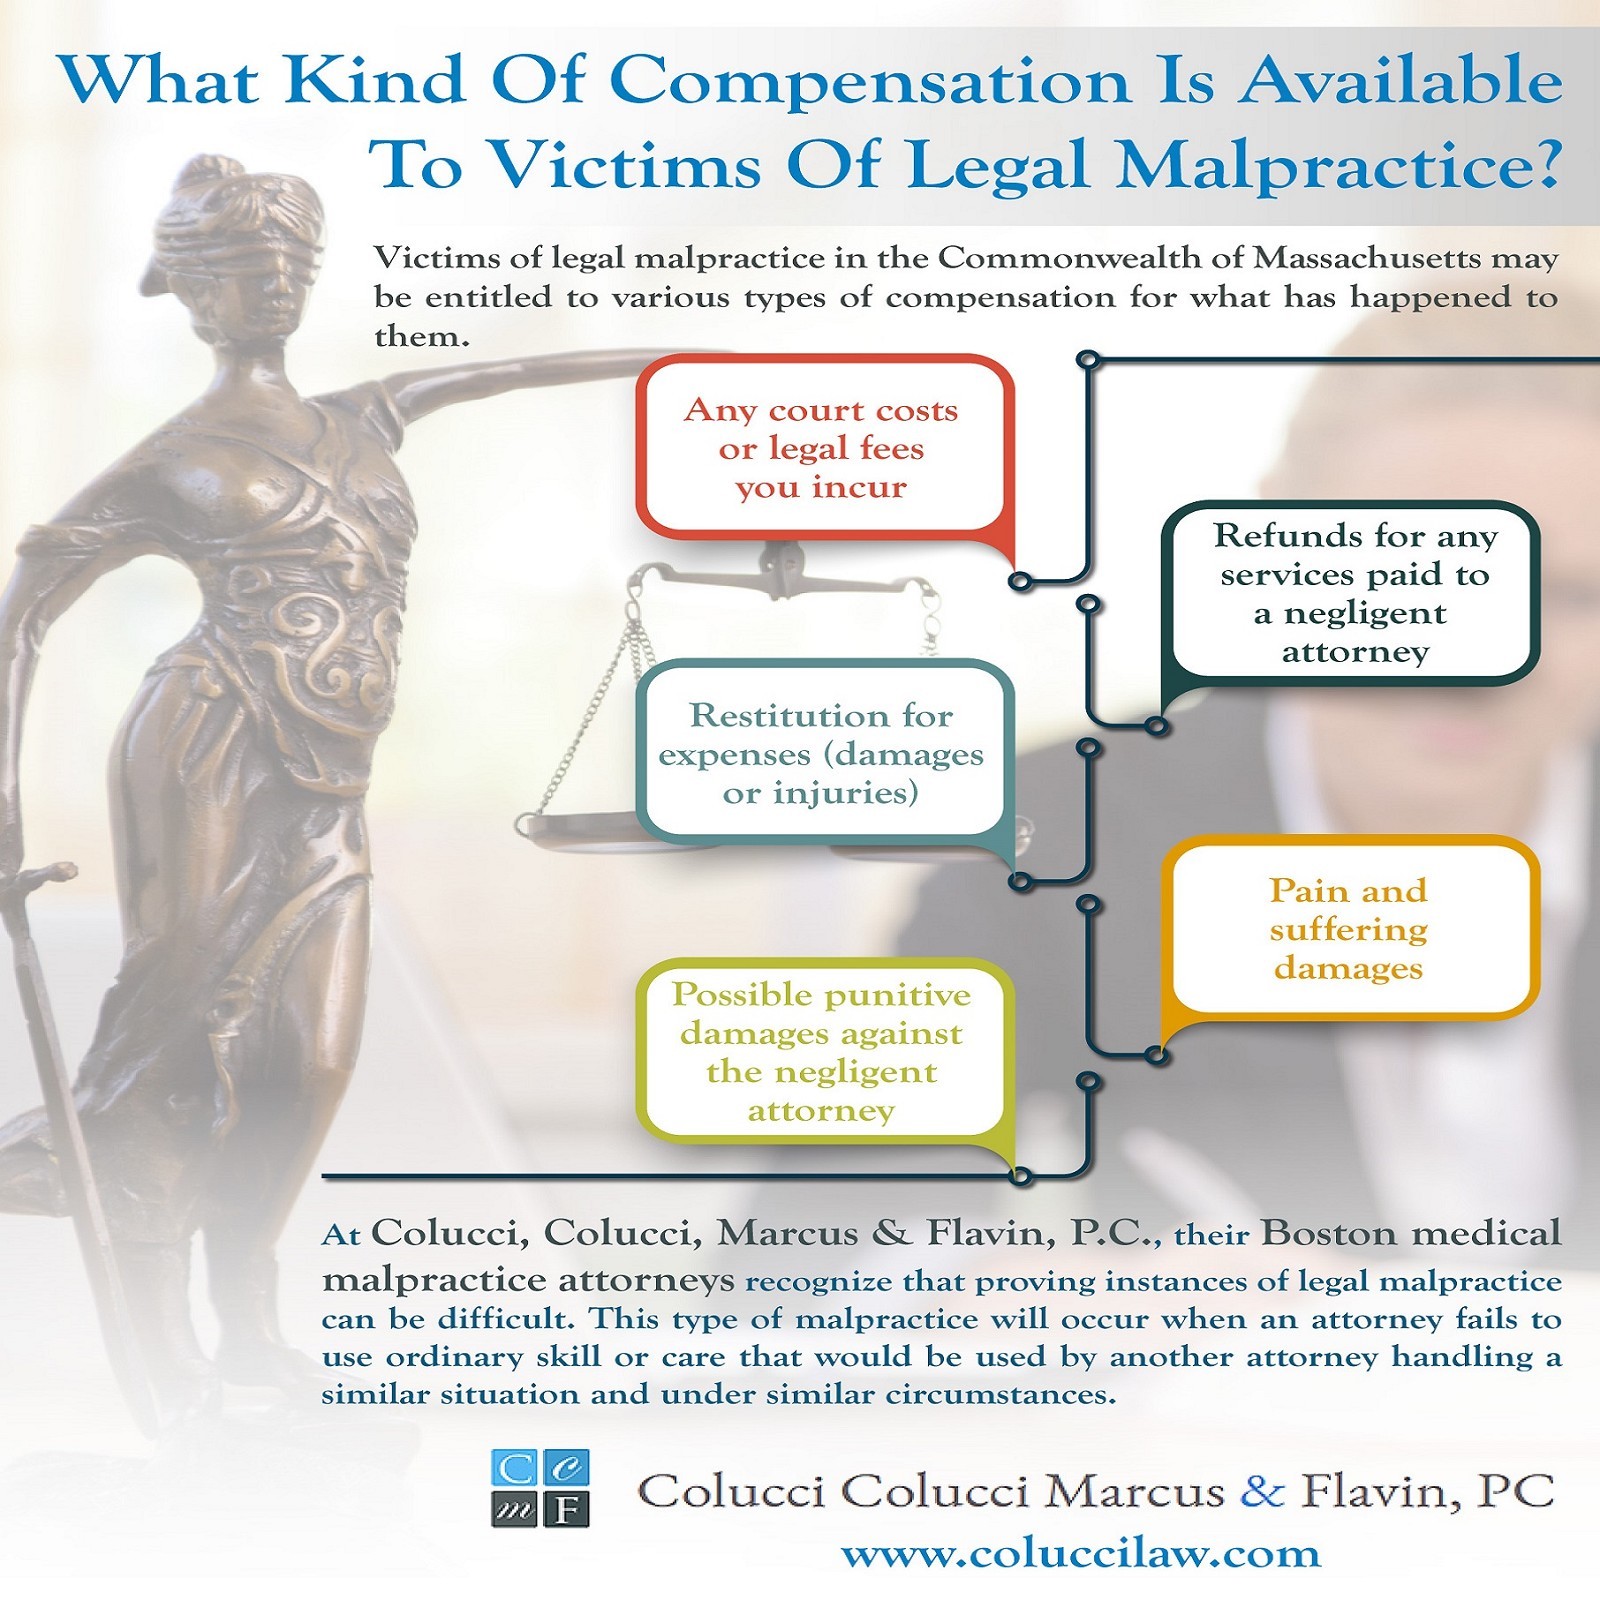 What Kind Of Compensation Is Available To Victims Of Legal Malpractice?